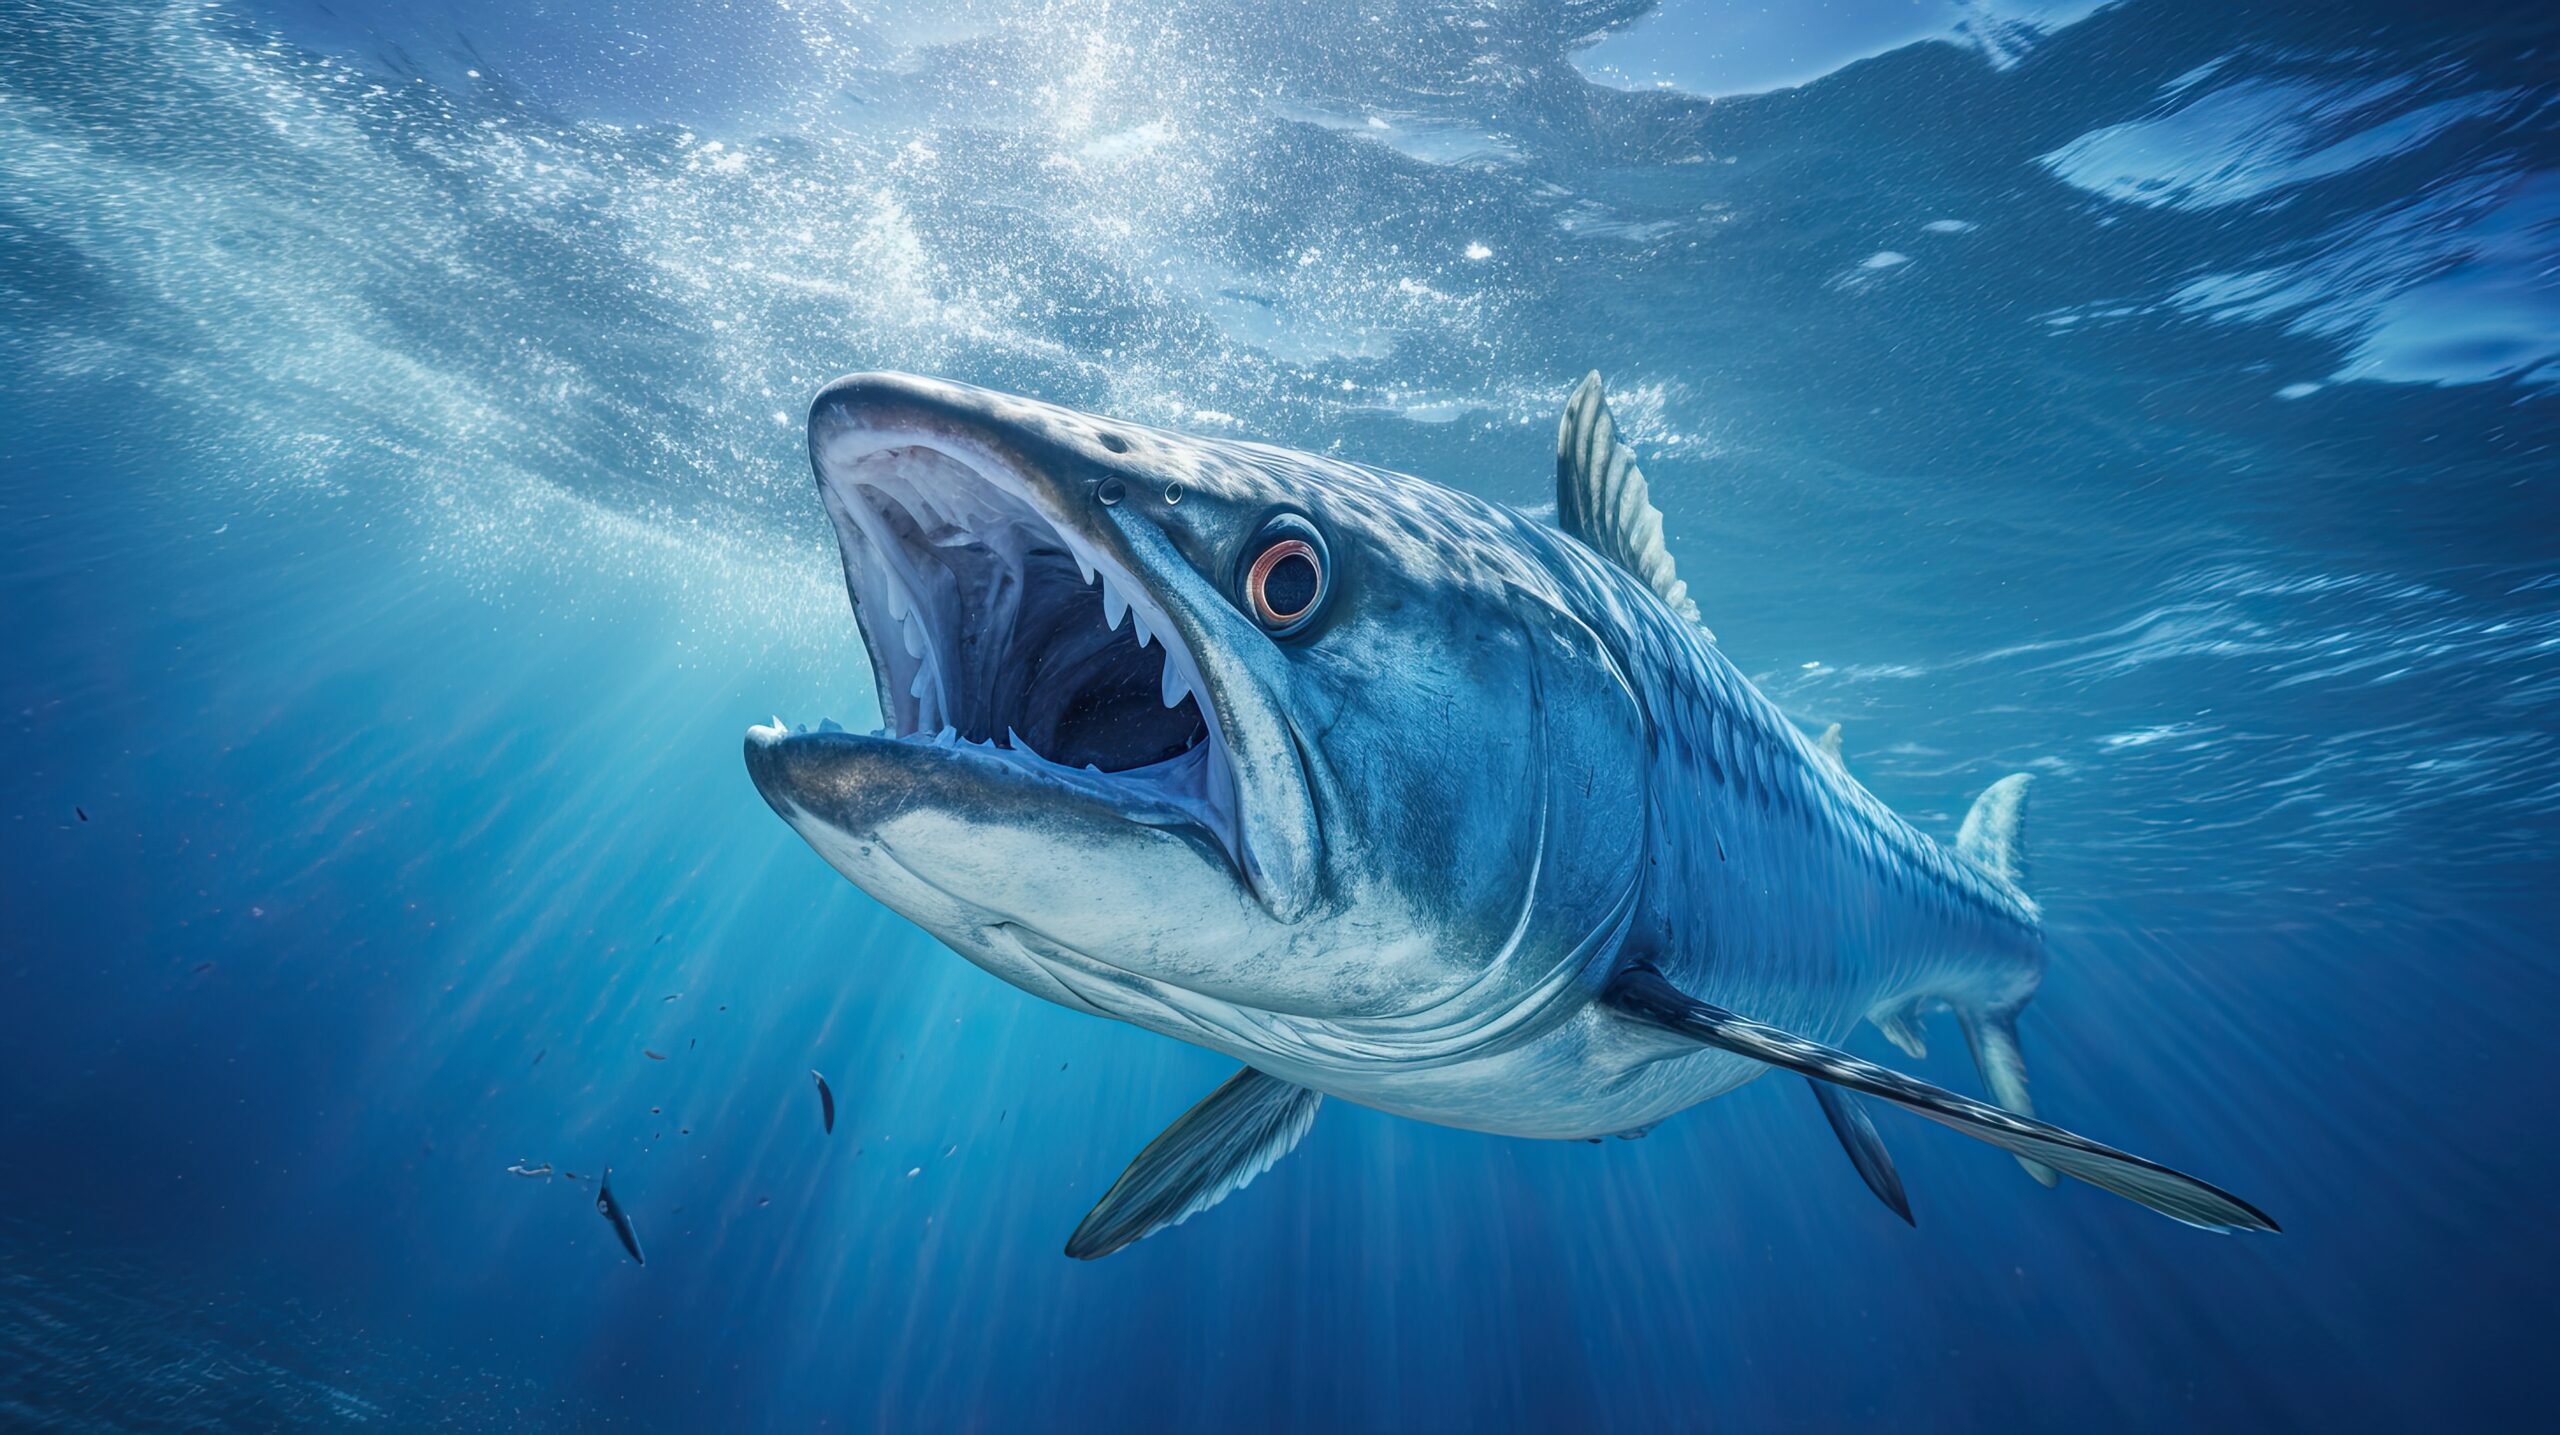 fanatic4fishing.com : What is the toughest fish in the ocean?